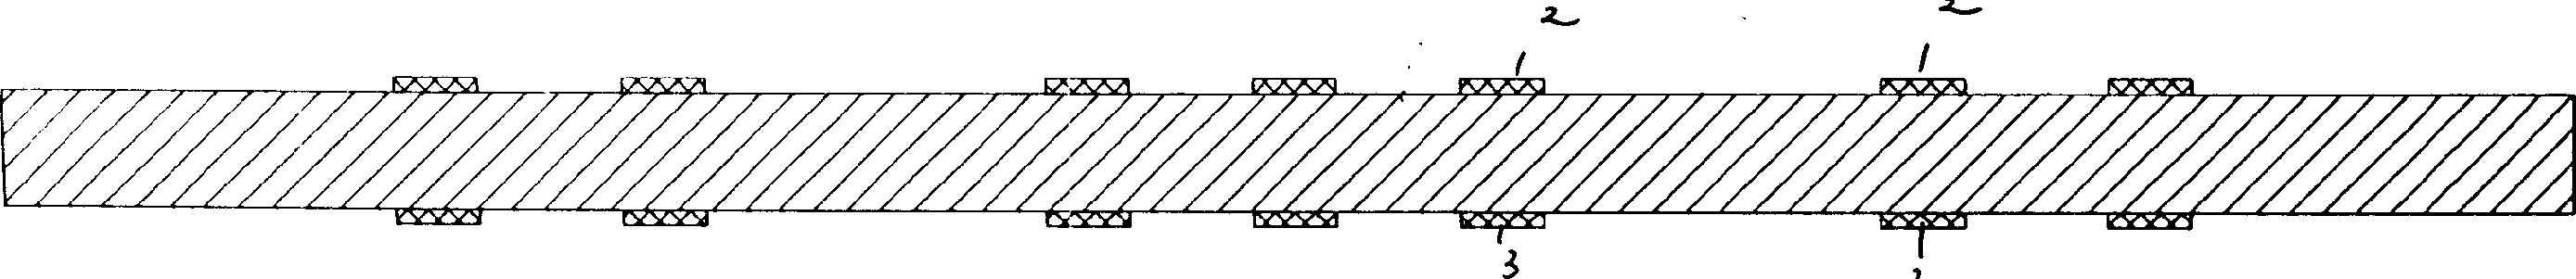 Planar salient point type technique for packaging intergrate circuit or discrete component